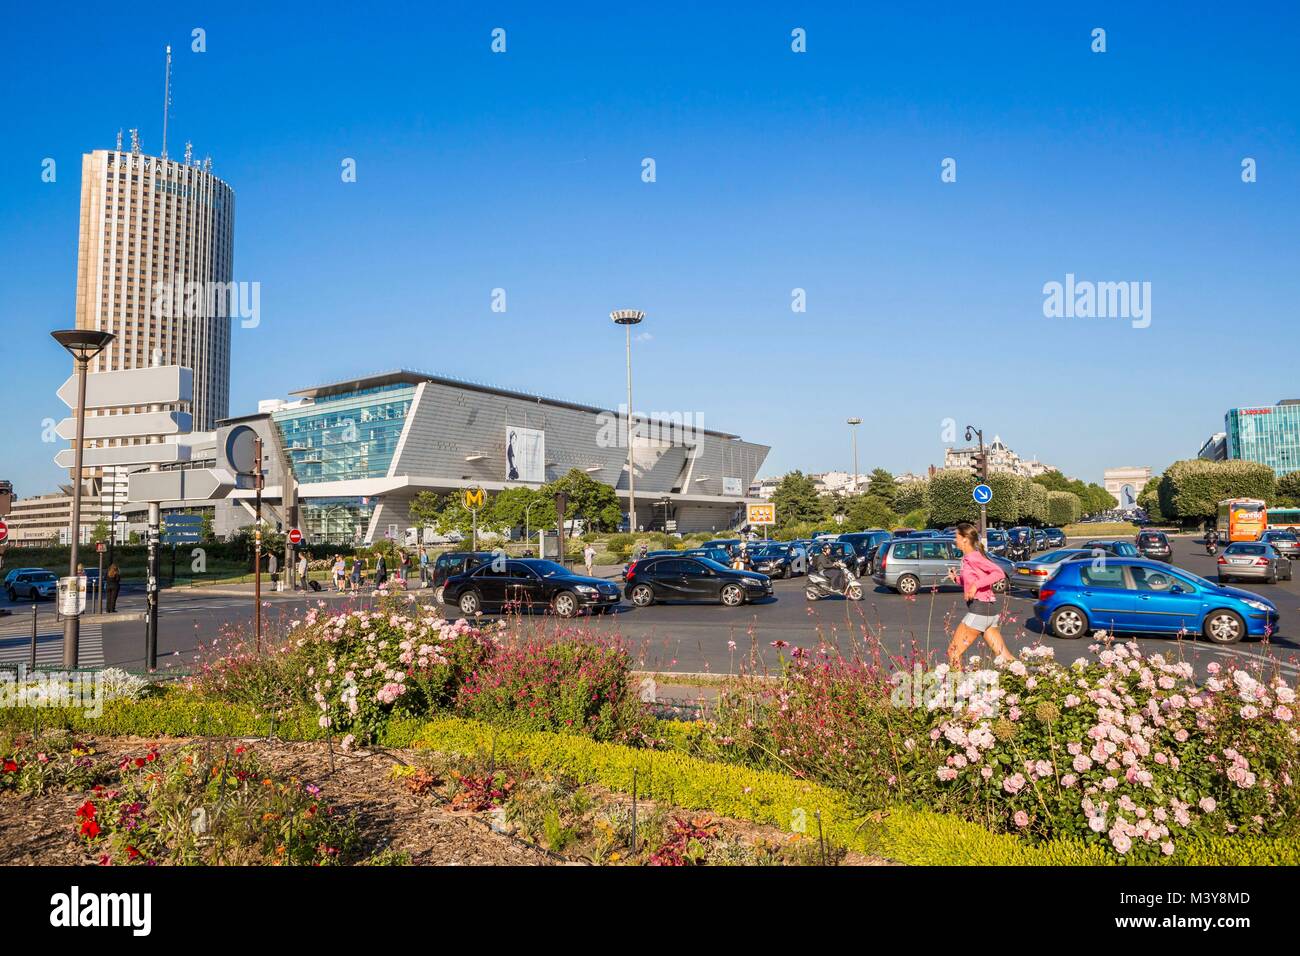 France, Paris, Porte Maillot and the tower of Concorde Lafayette hotel  Stock Photo - Alamy